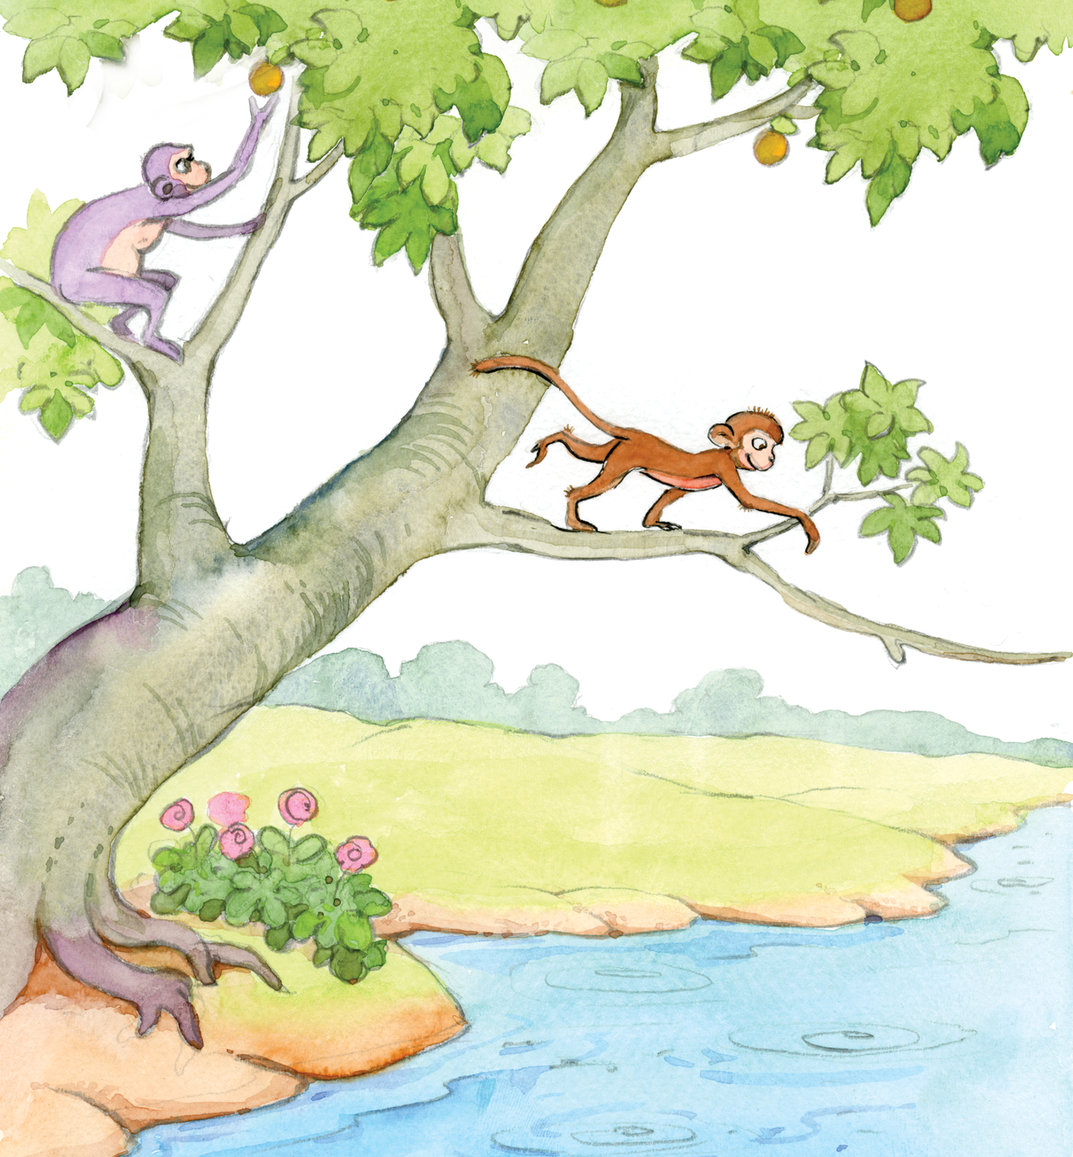 Two monkeys on a tree overlooking a river - StoryWeaver